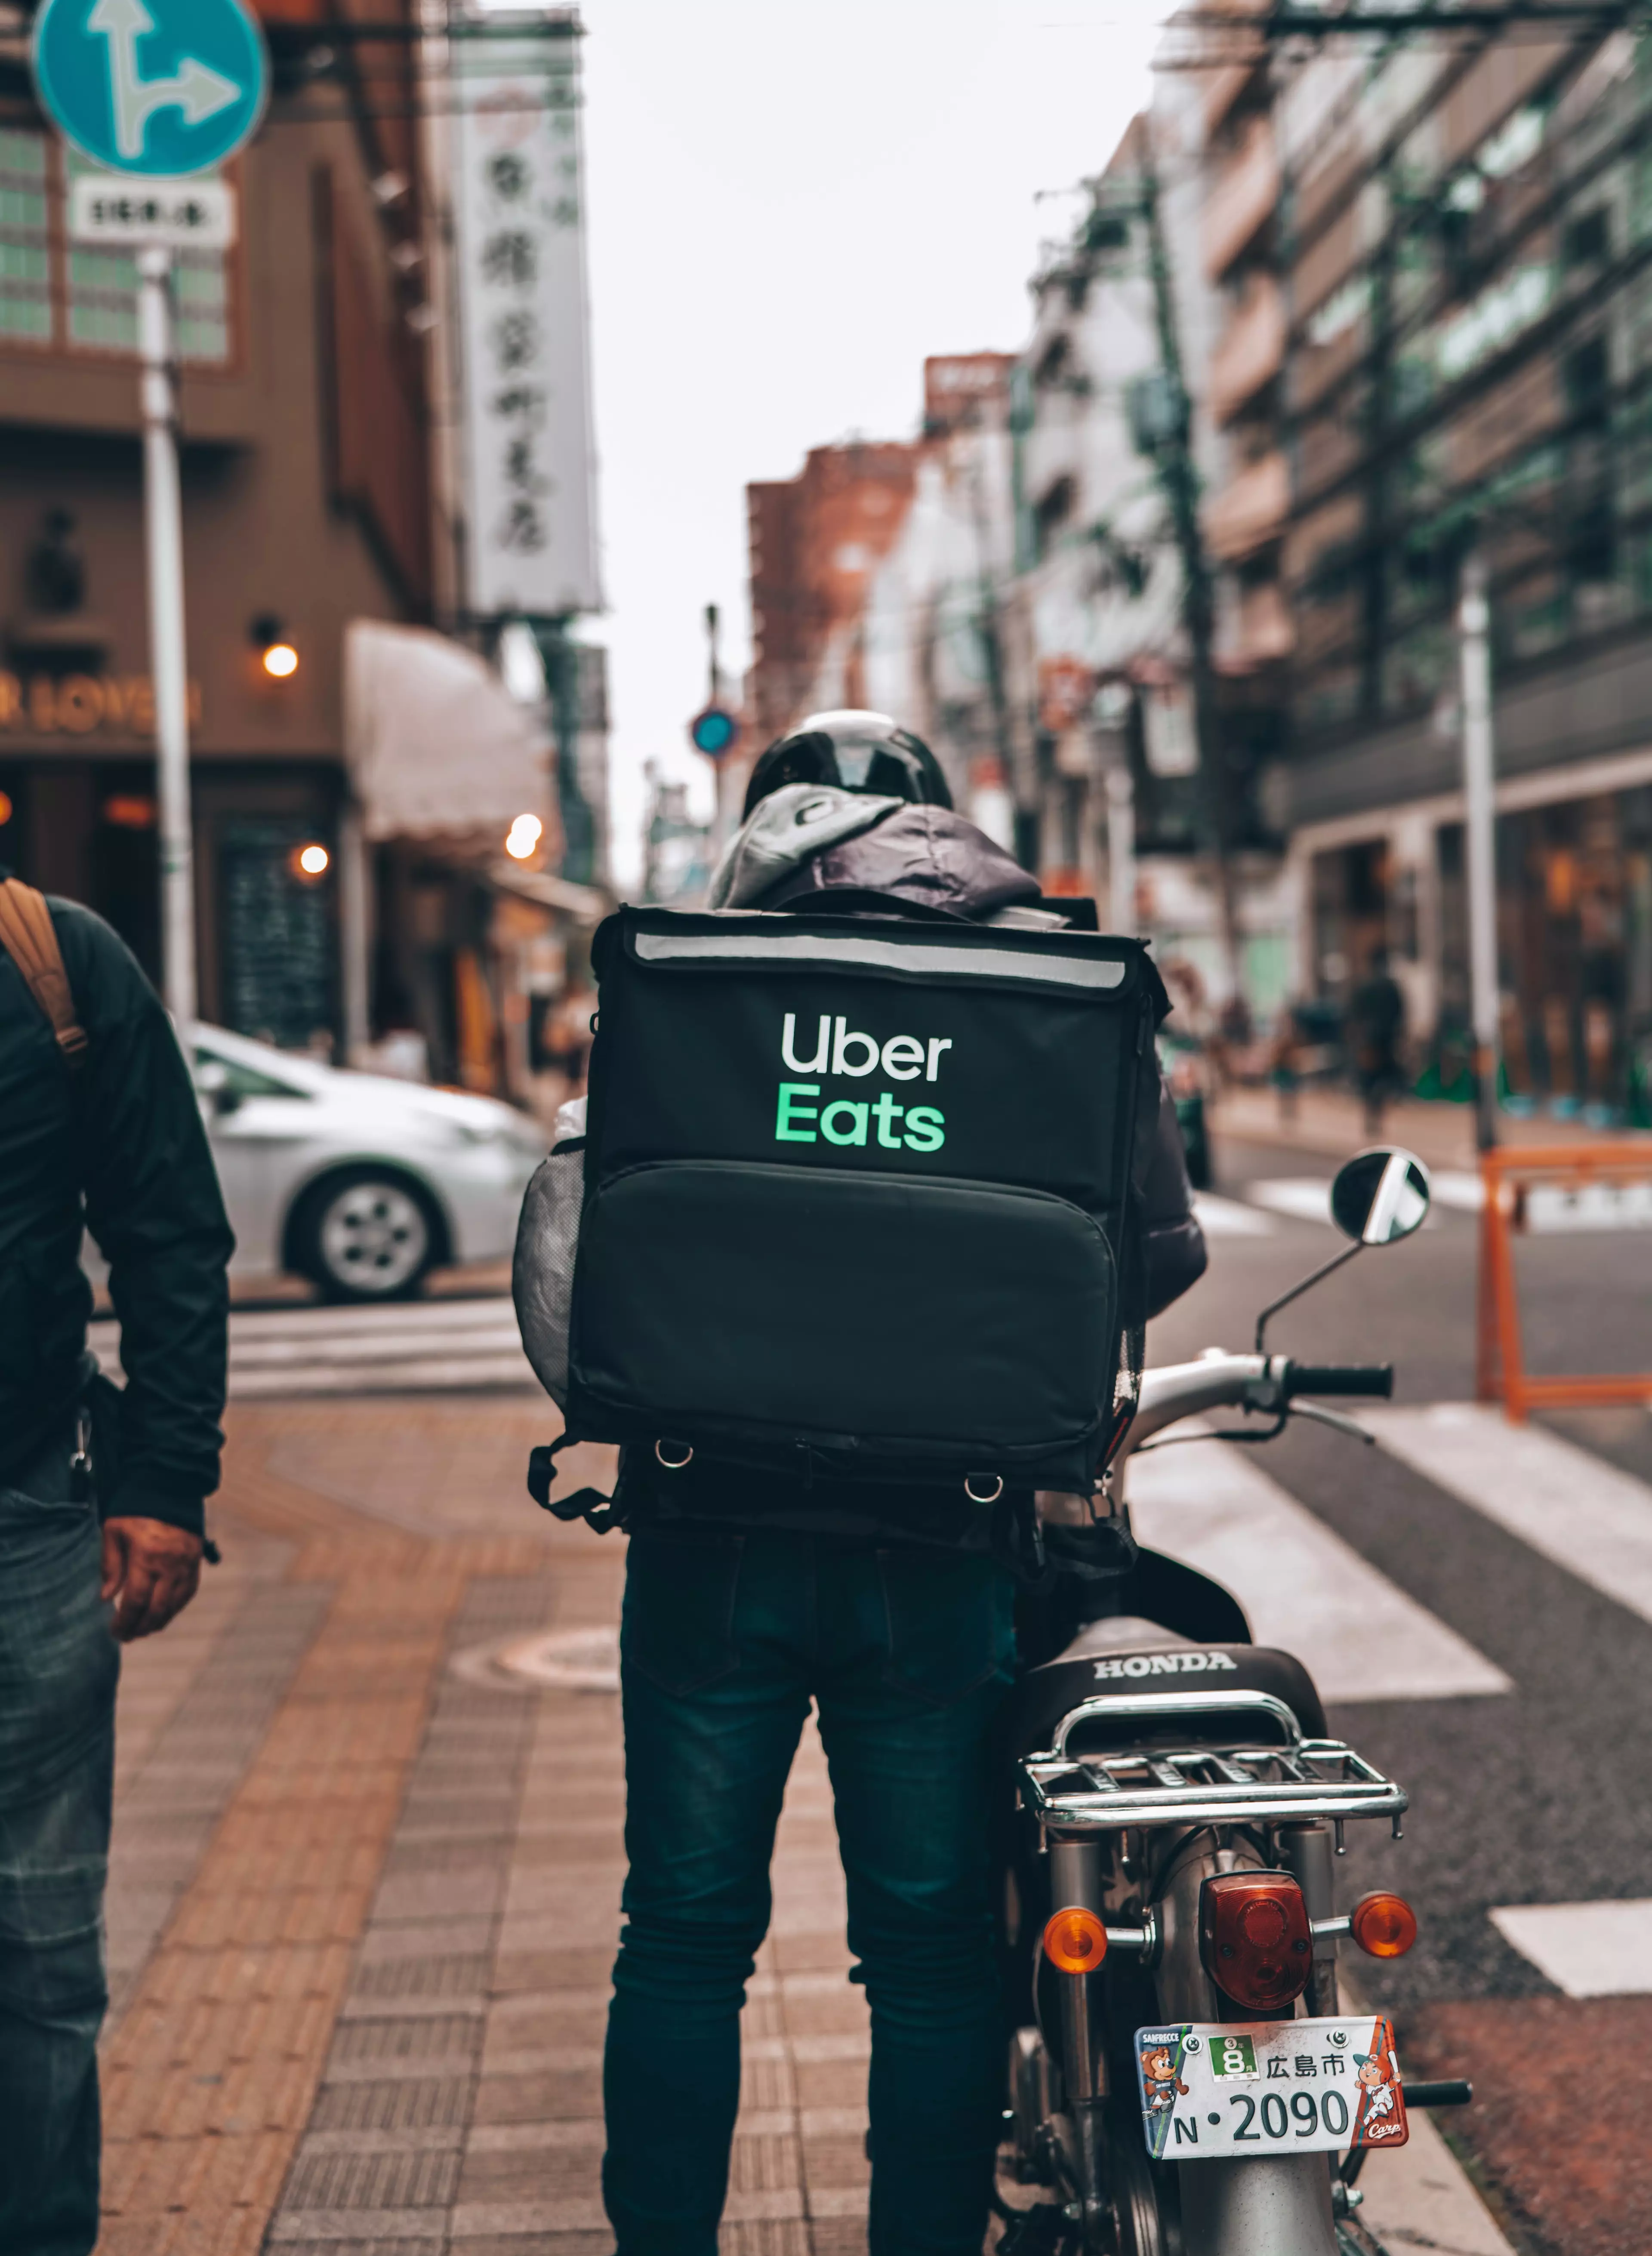 Uber Eats will collect your shopping (